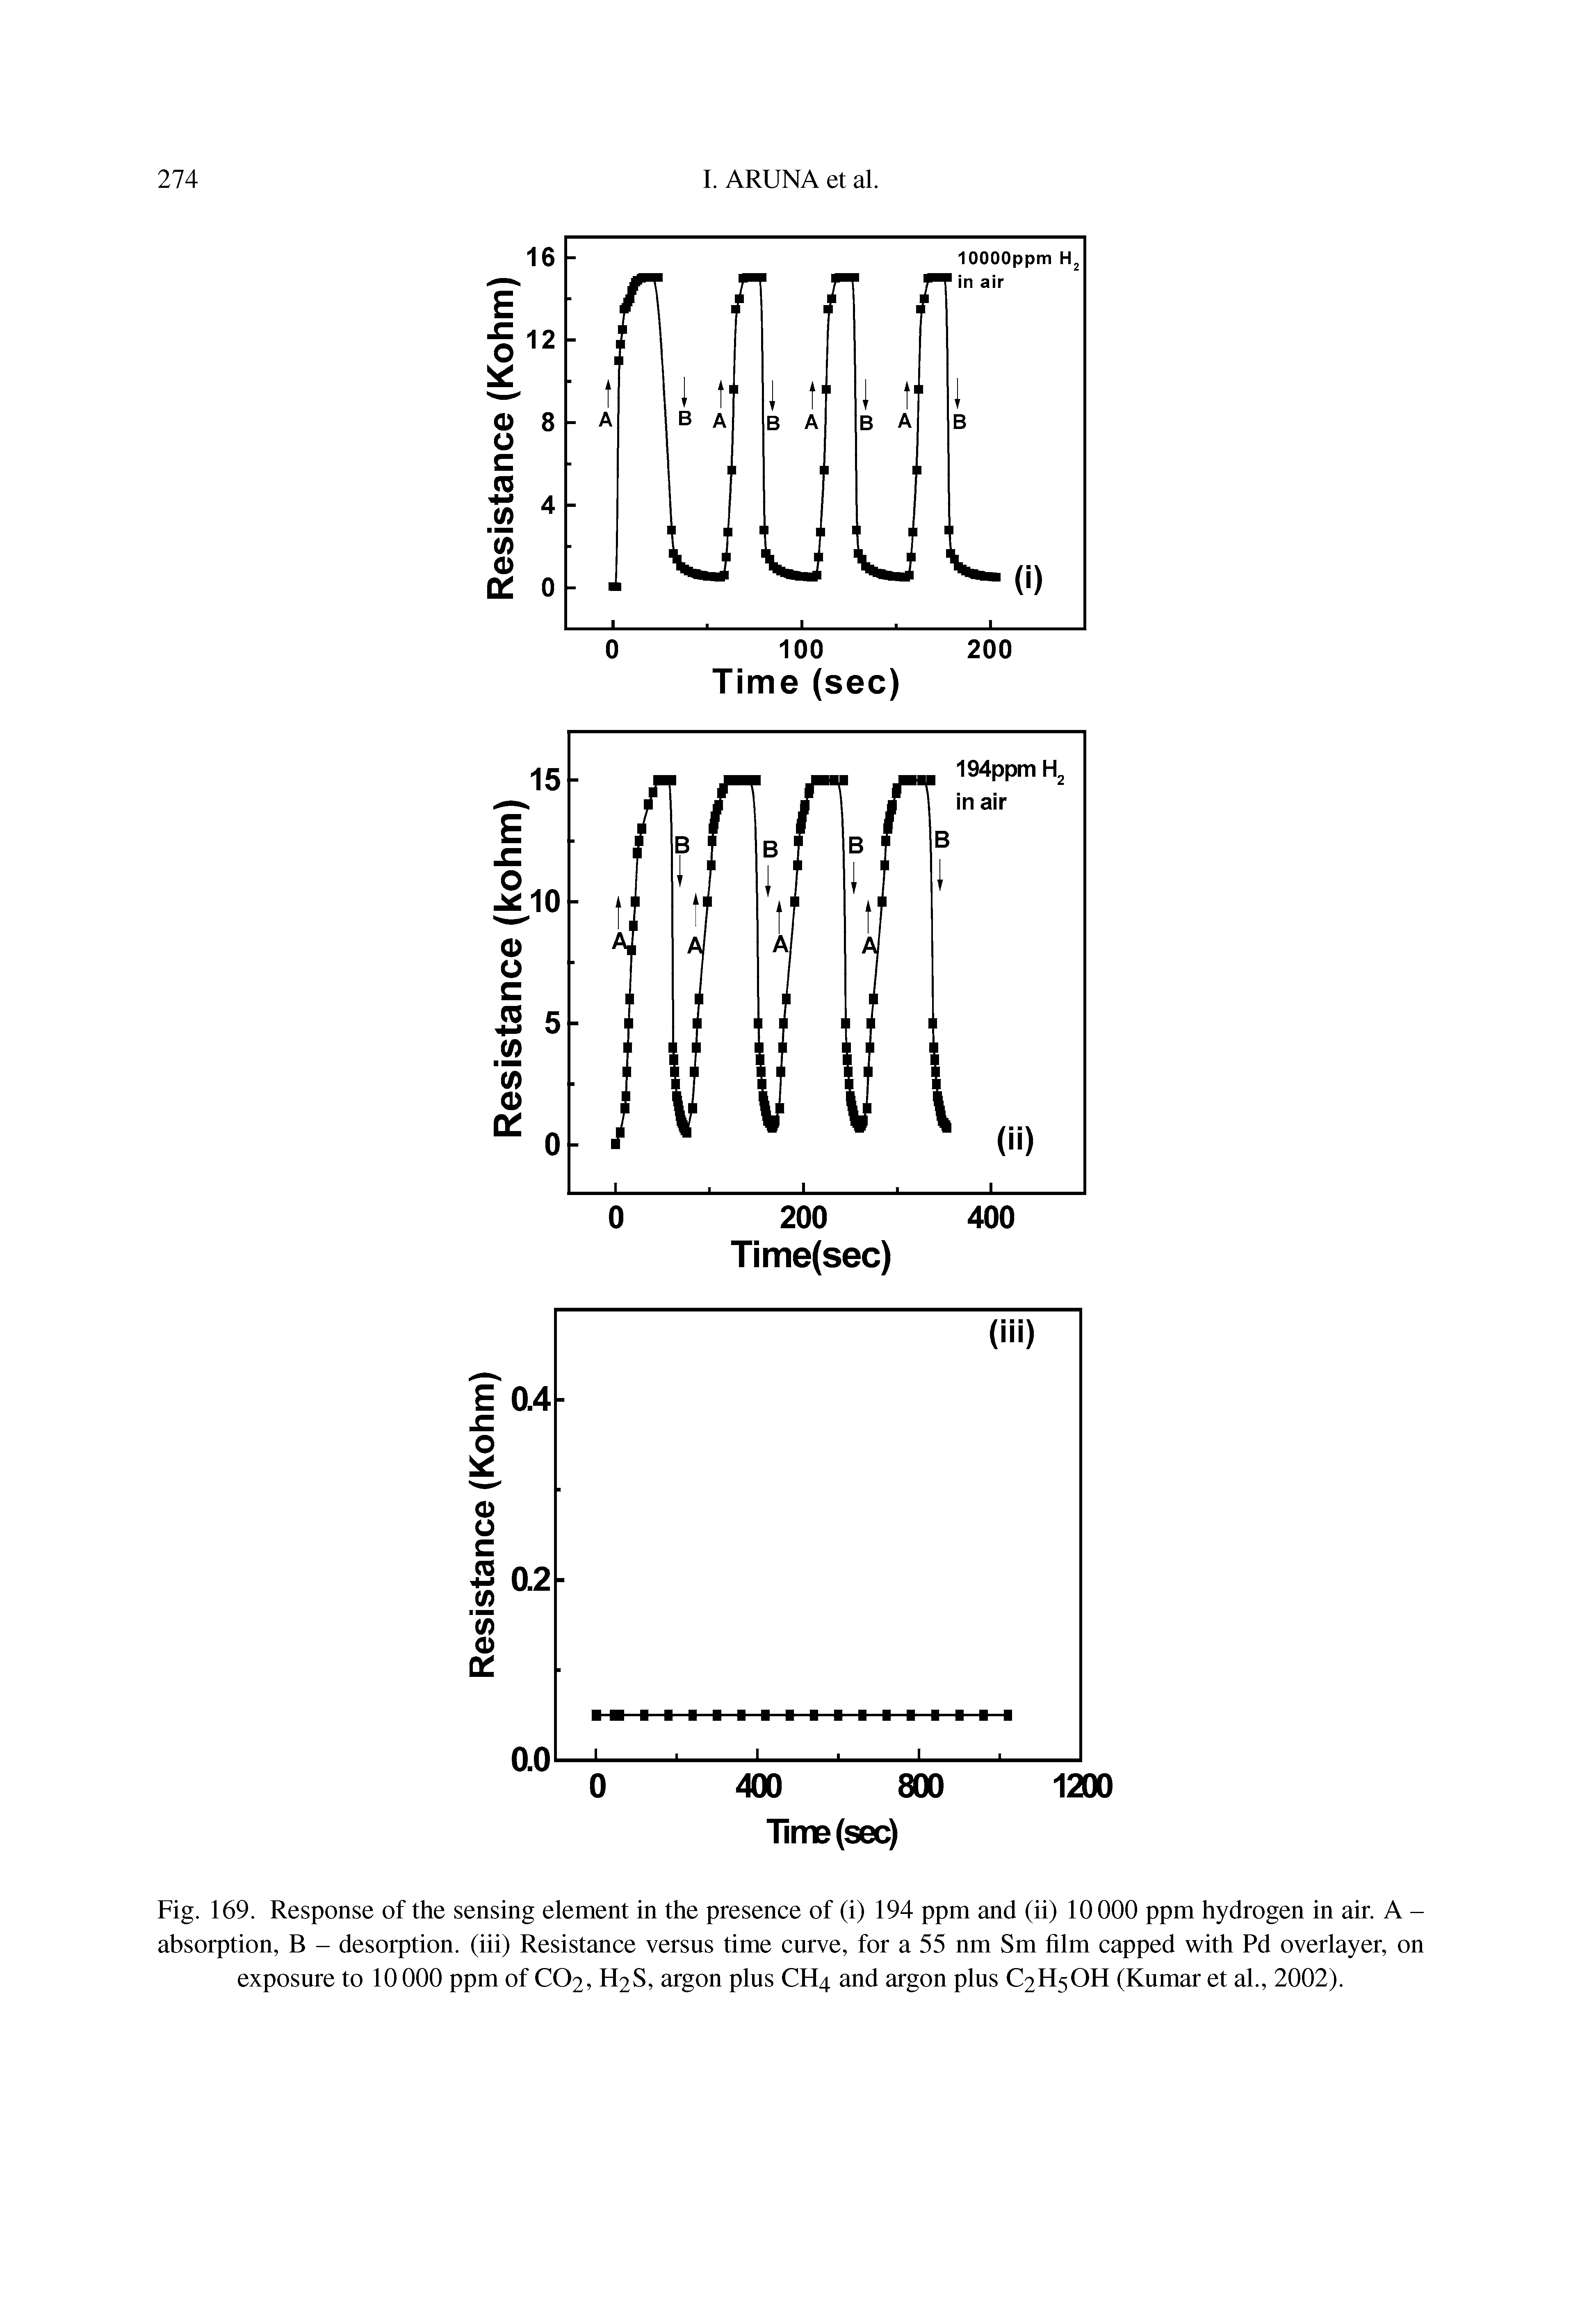 Fig. 169. Response of the sensing element in the presence of (i) 194 ppm and (ii) 10000 ppm hydrogen in air. A -absorption, B - desorption, (hi) Resistance versus time curve, for a 55 nm Sm him capped with Pd overlayer, on exposure to 10 000 ppm of CO2, H2S, argon plus CH4 and argon plus C2H5OH (Kumar et al., 2002).